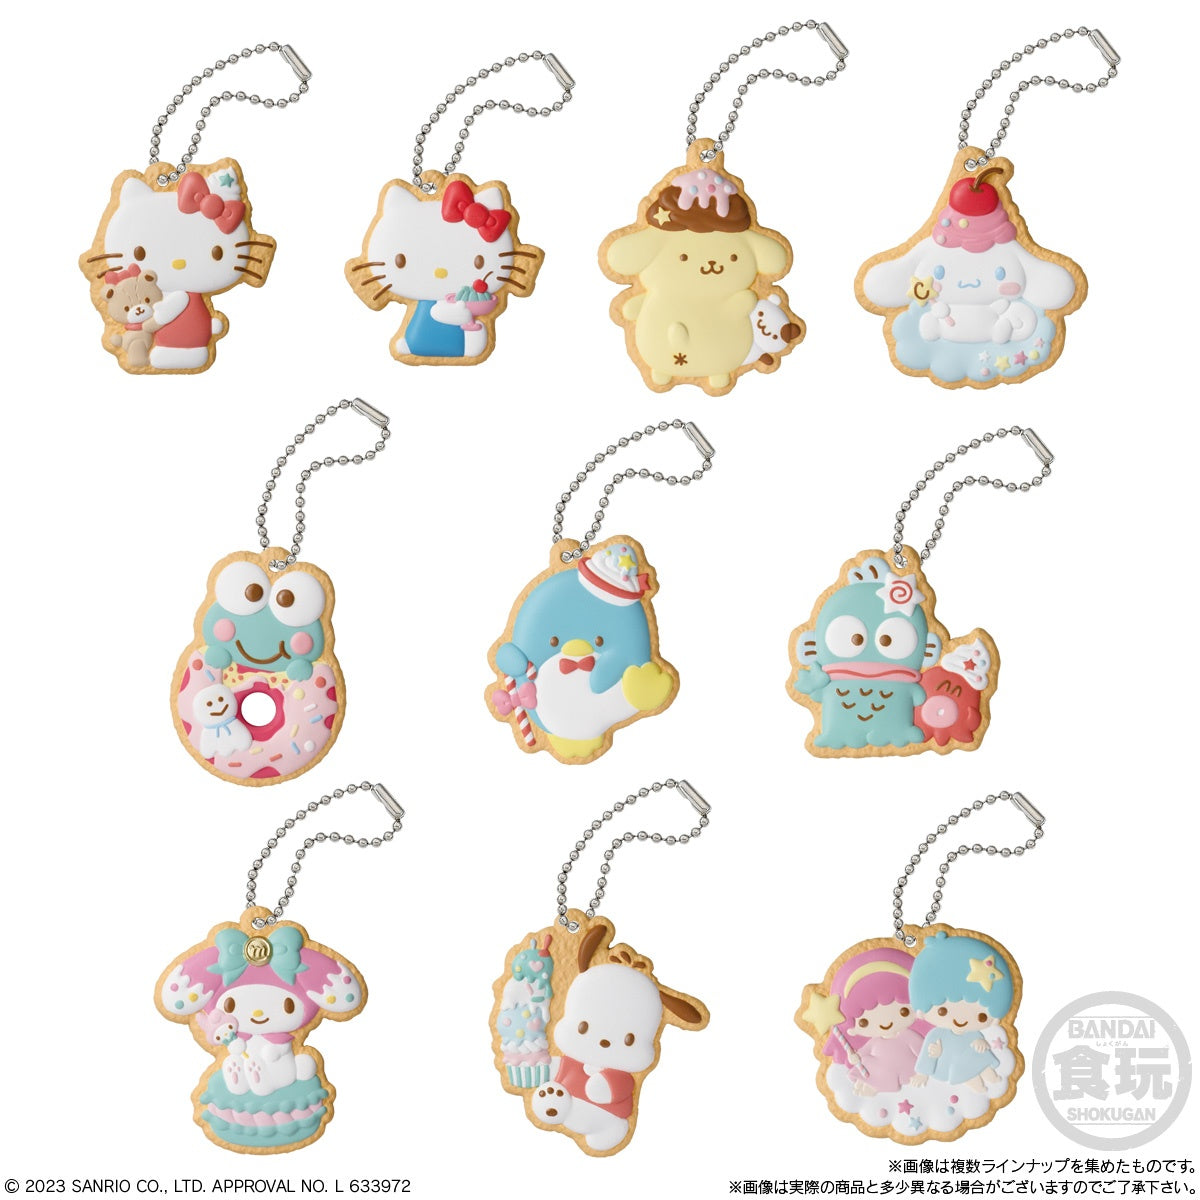 Sanrio Characters Cookie Charmcot Blind Box (Single Unit)